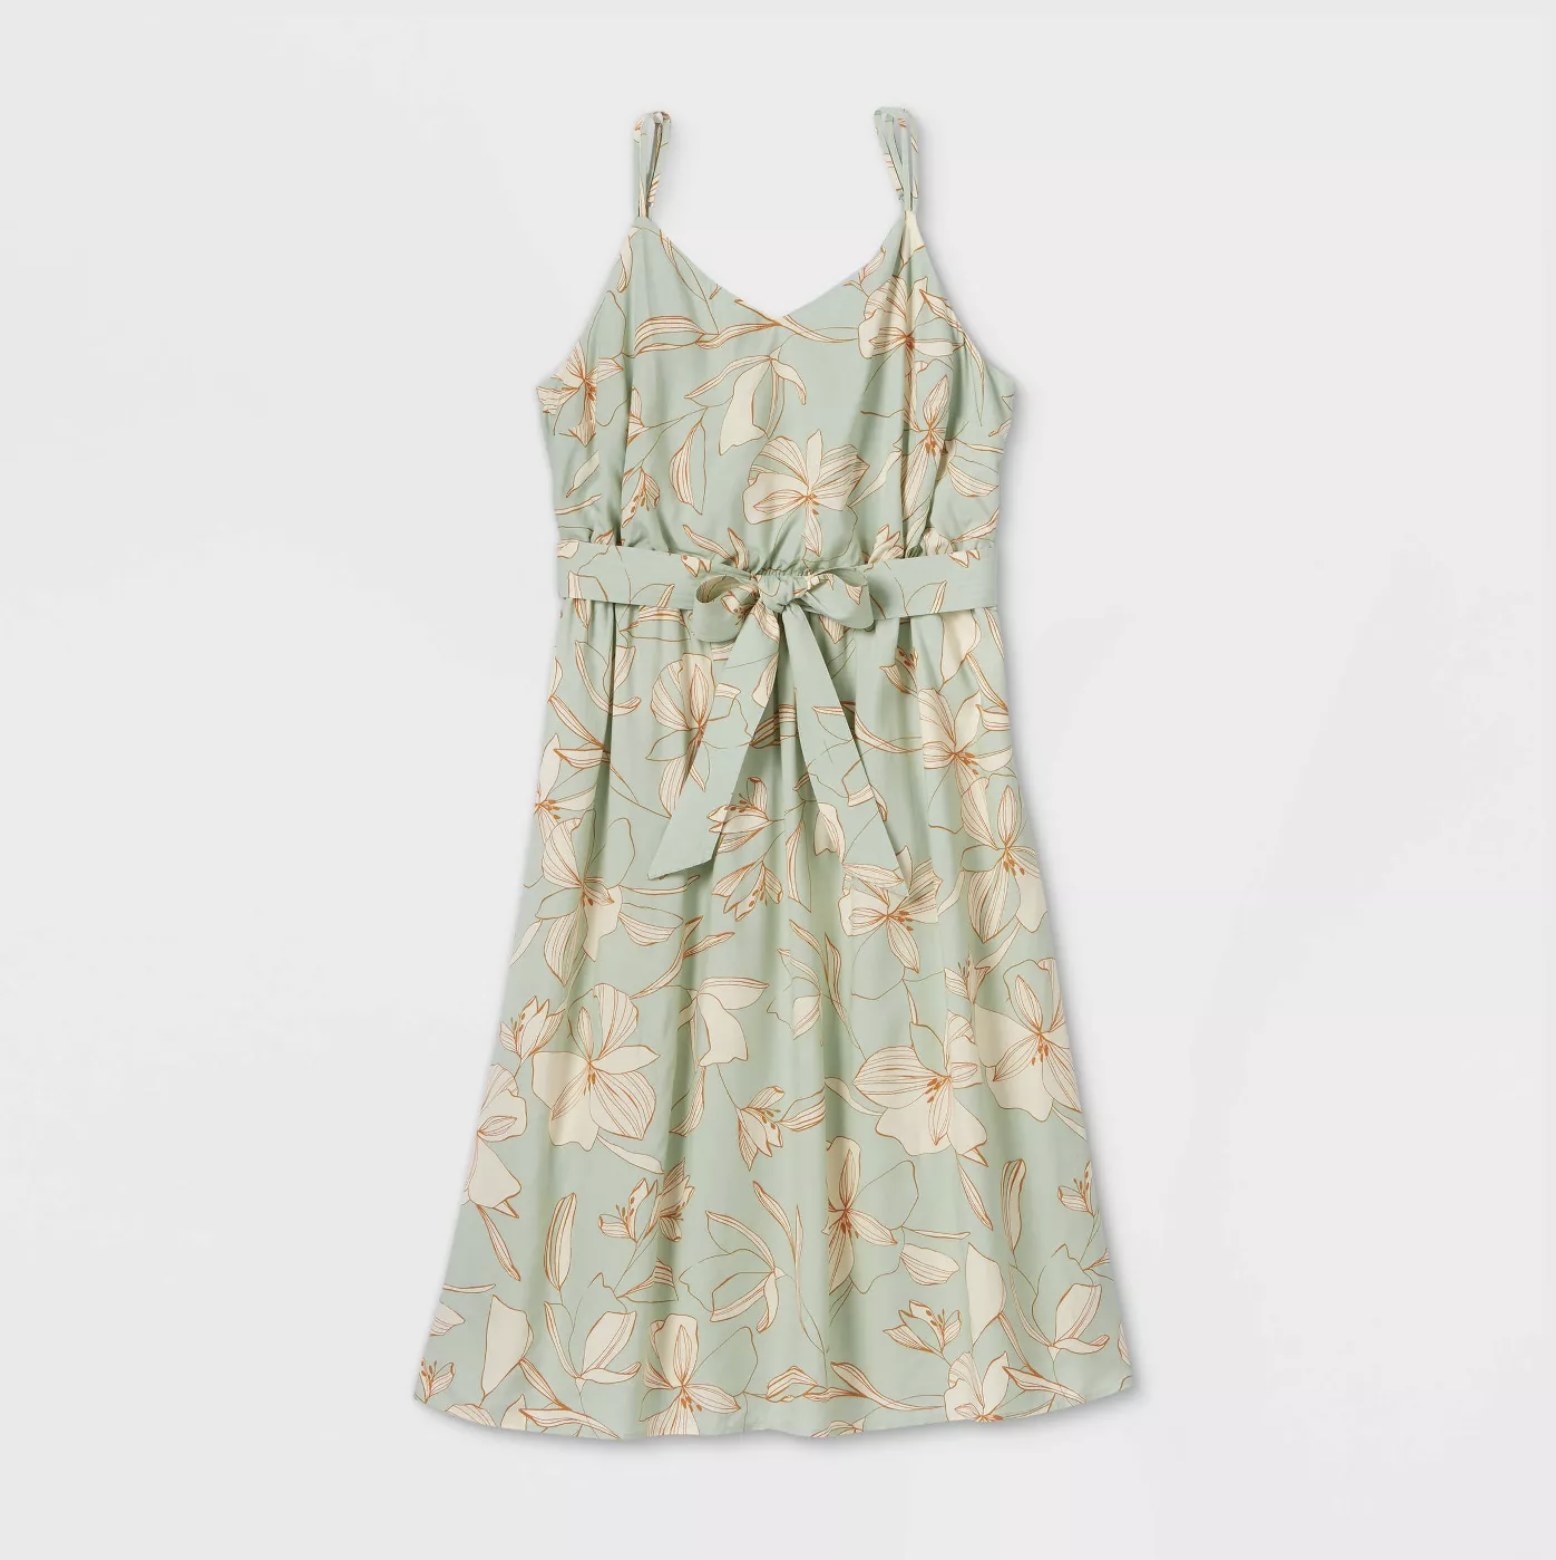 Tie-waist sleeveless green dress with white floral print